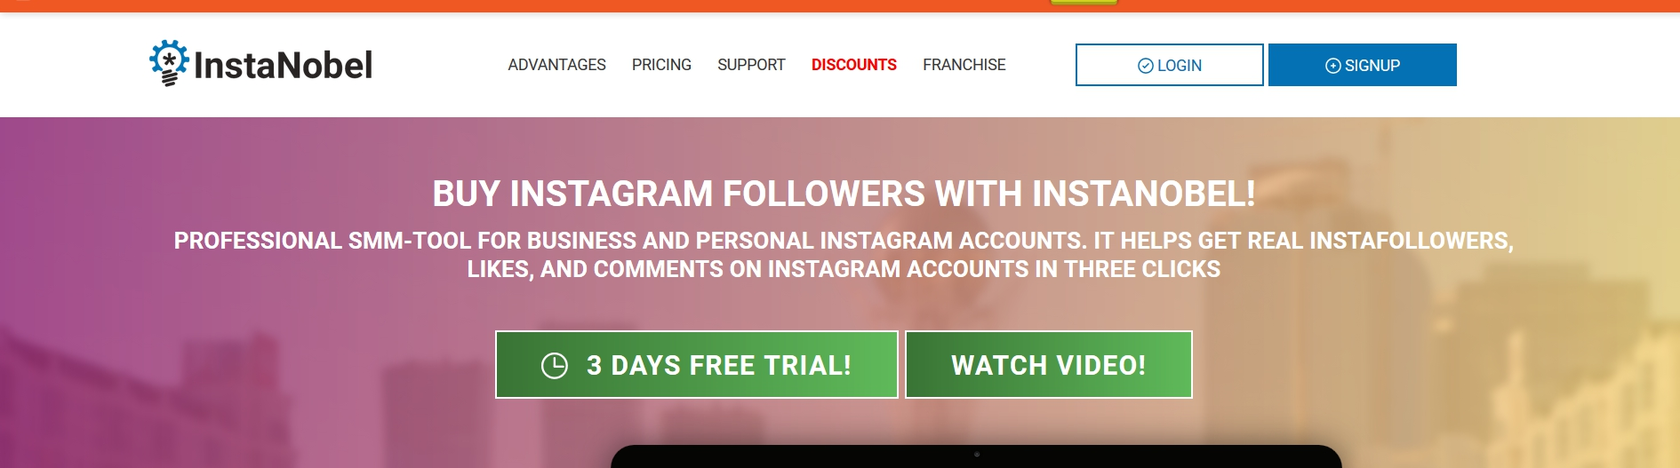 5 best online automation services with instagram direct message option 2019 - send message to all instagram followers